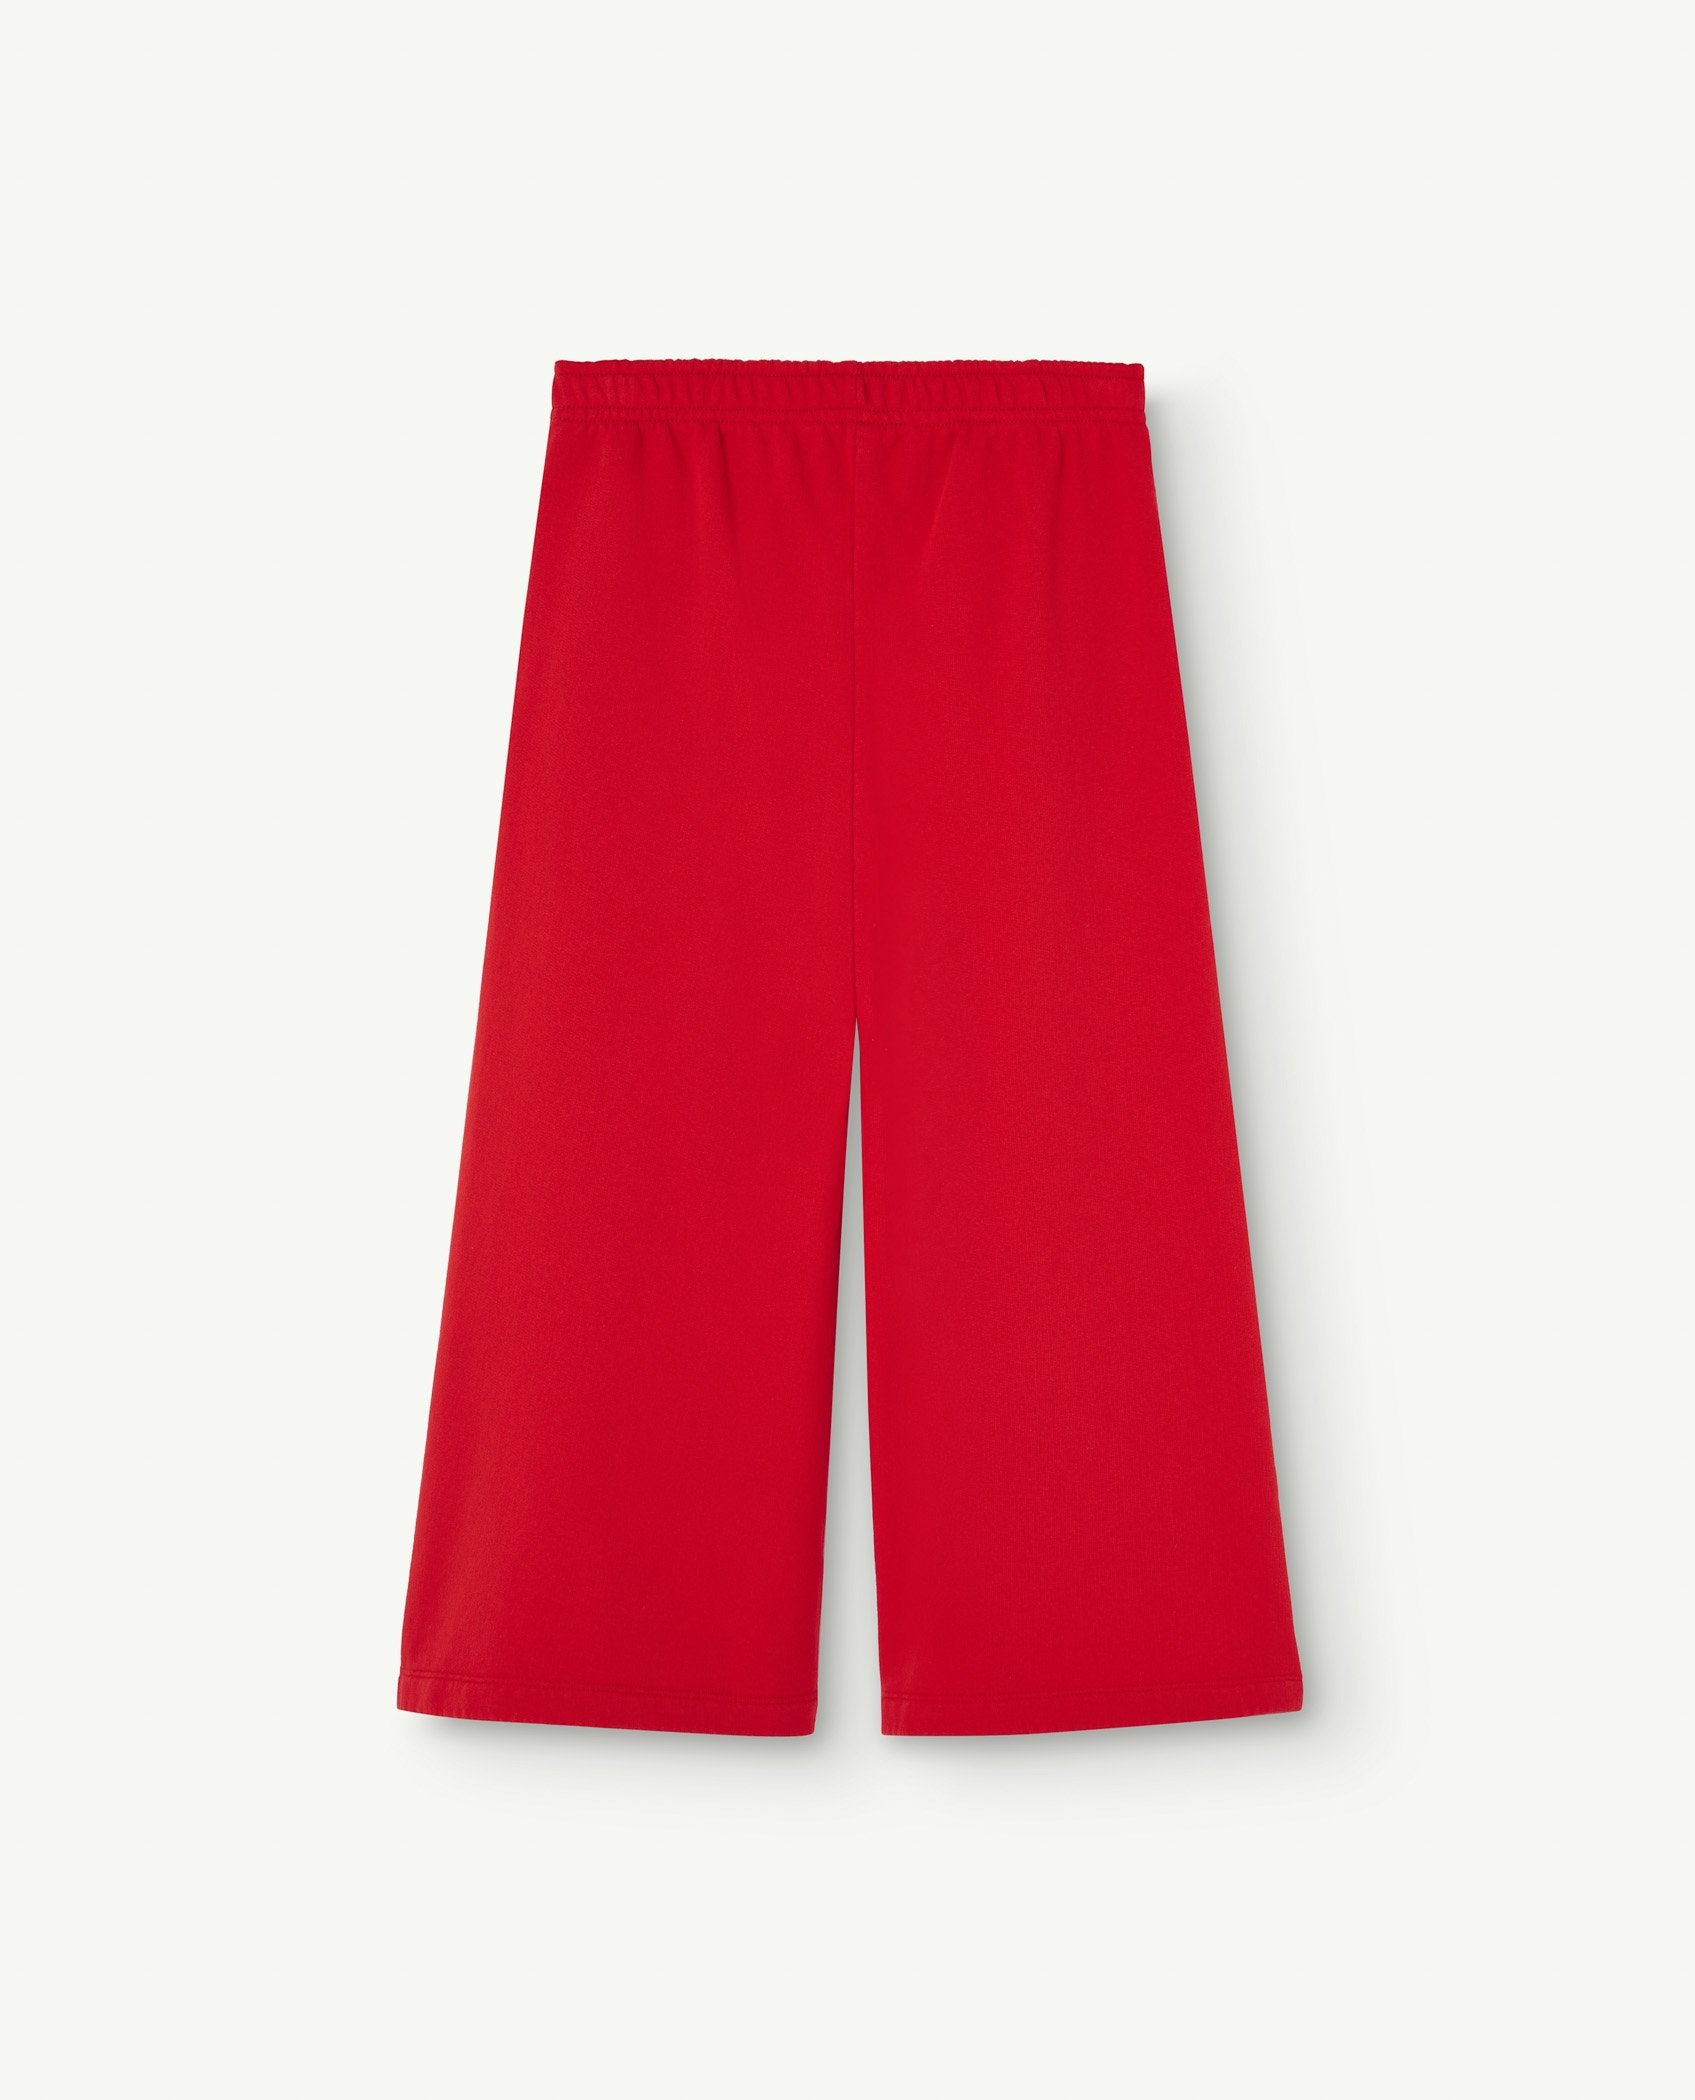 Red Platypus Sweatpants PRODUCT BACK